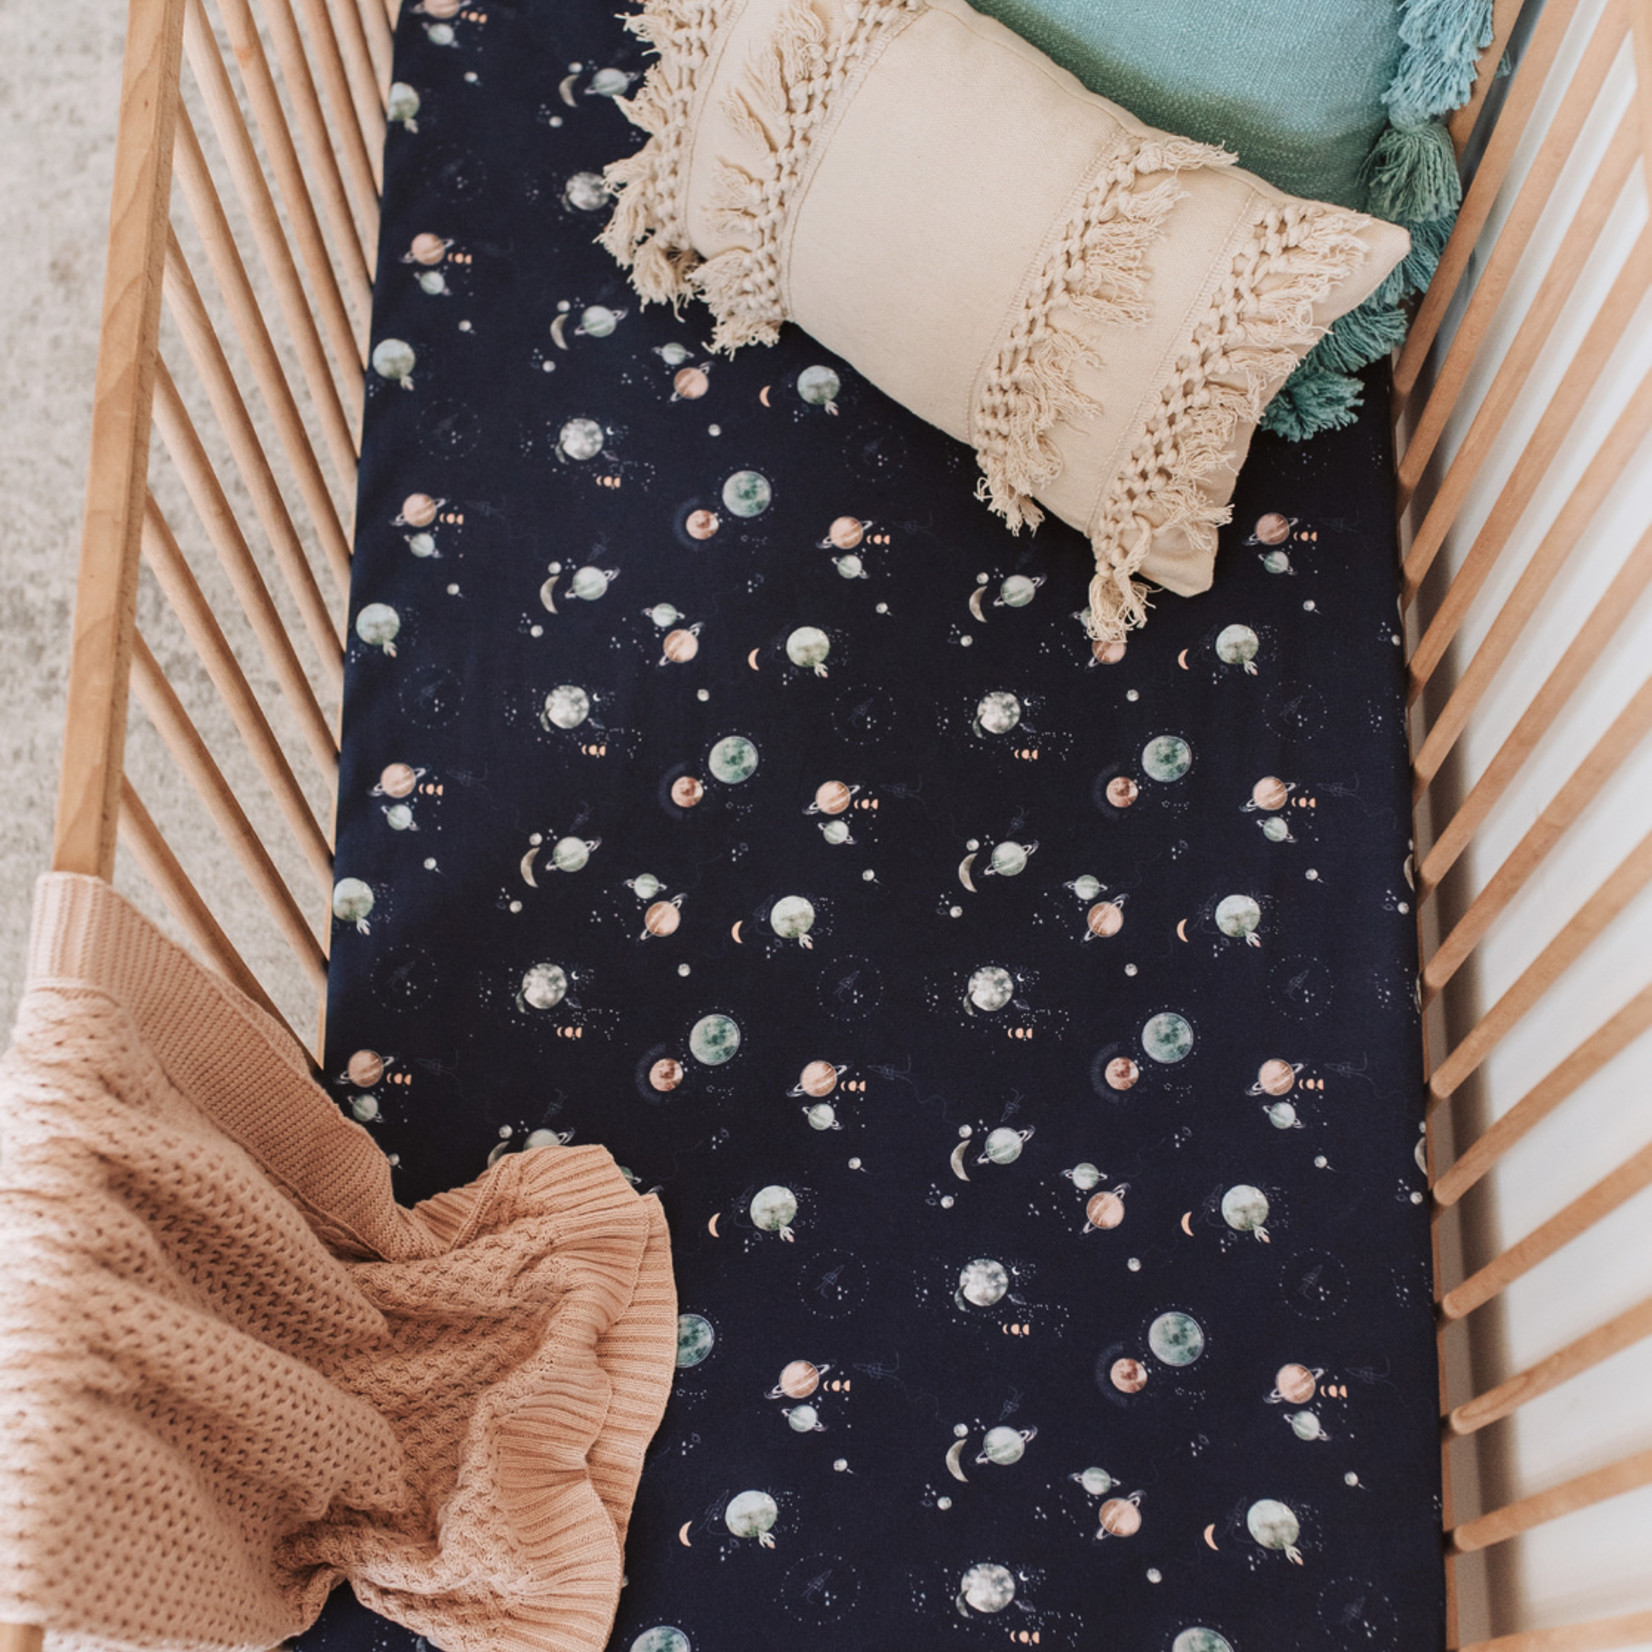 Snuggle Hunny Fitted Cot Sheet - Milky Way